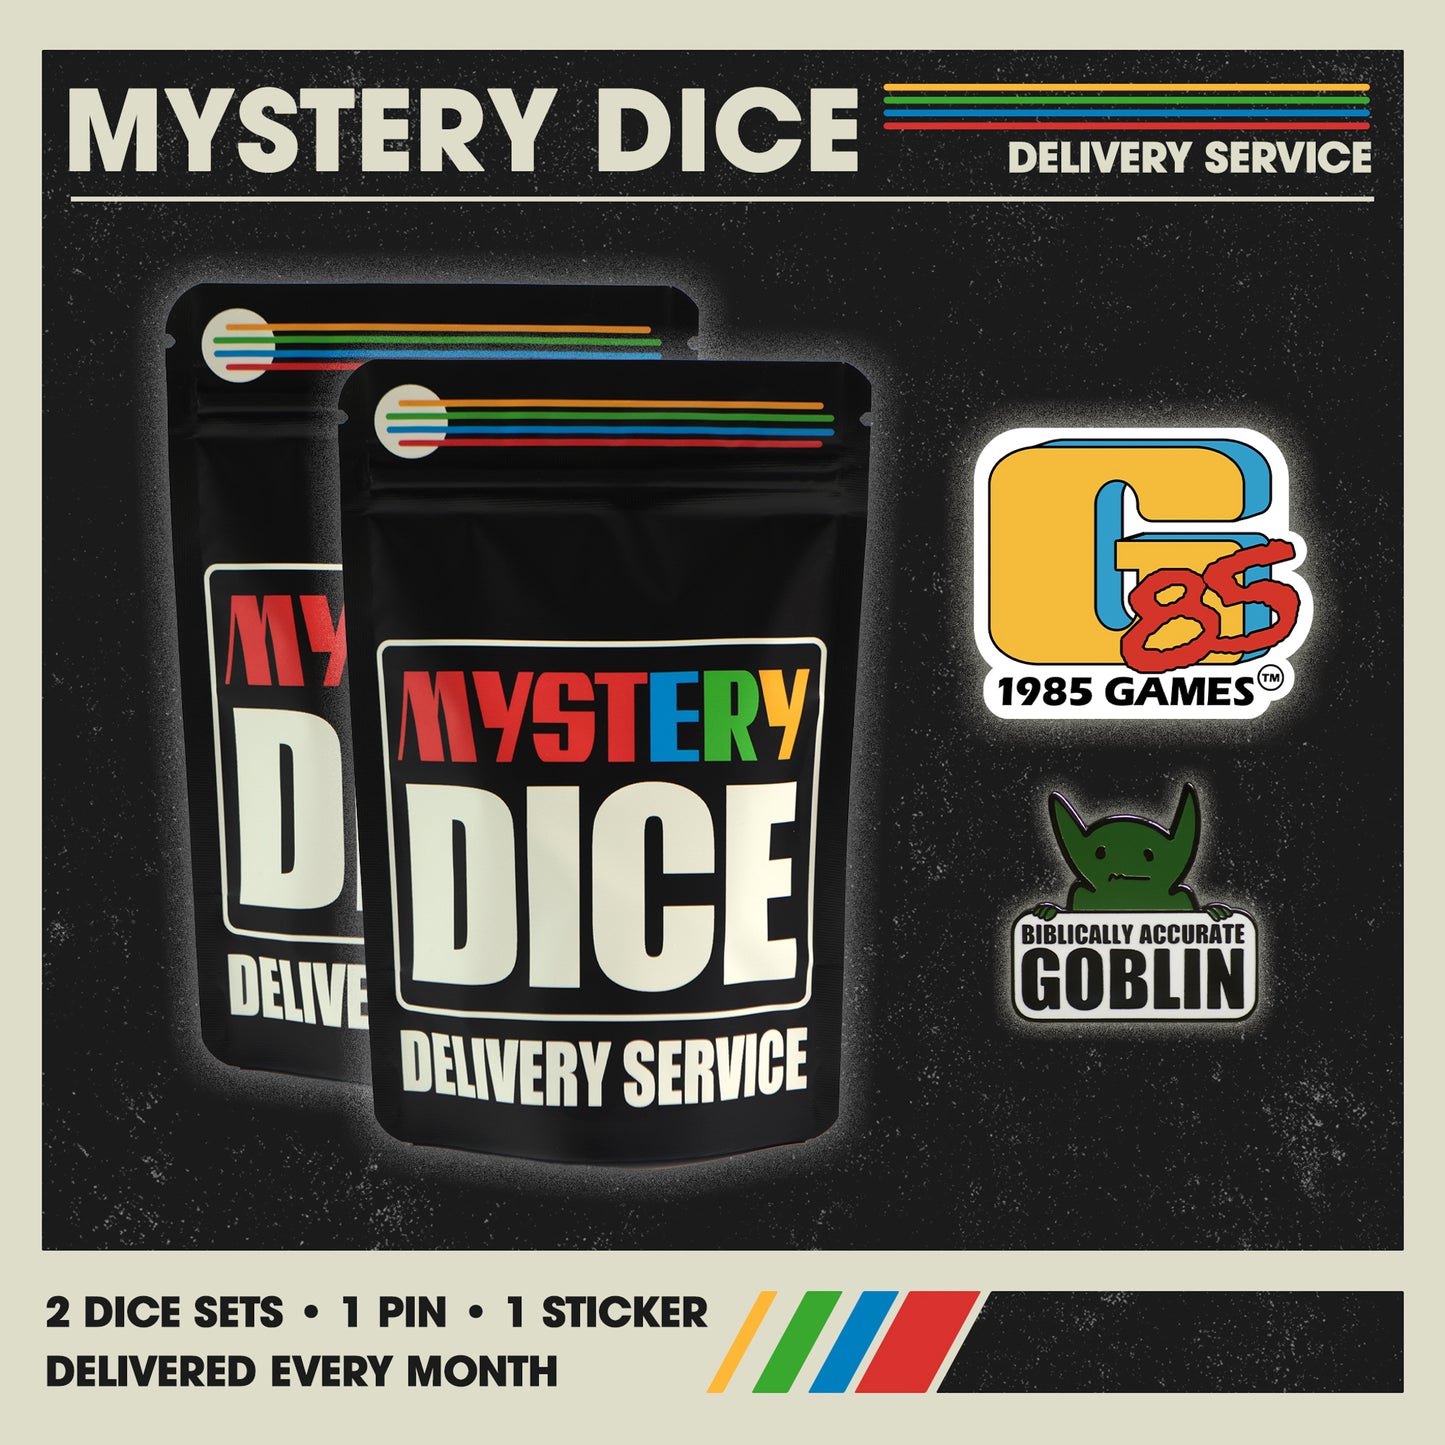 Mystery Dice Delivery Service